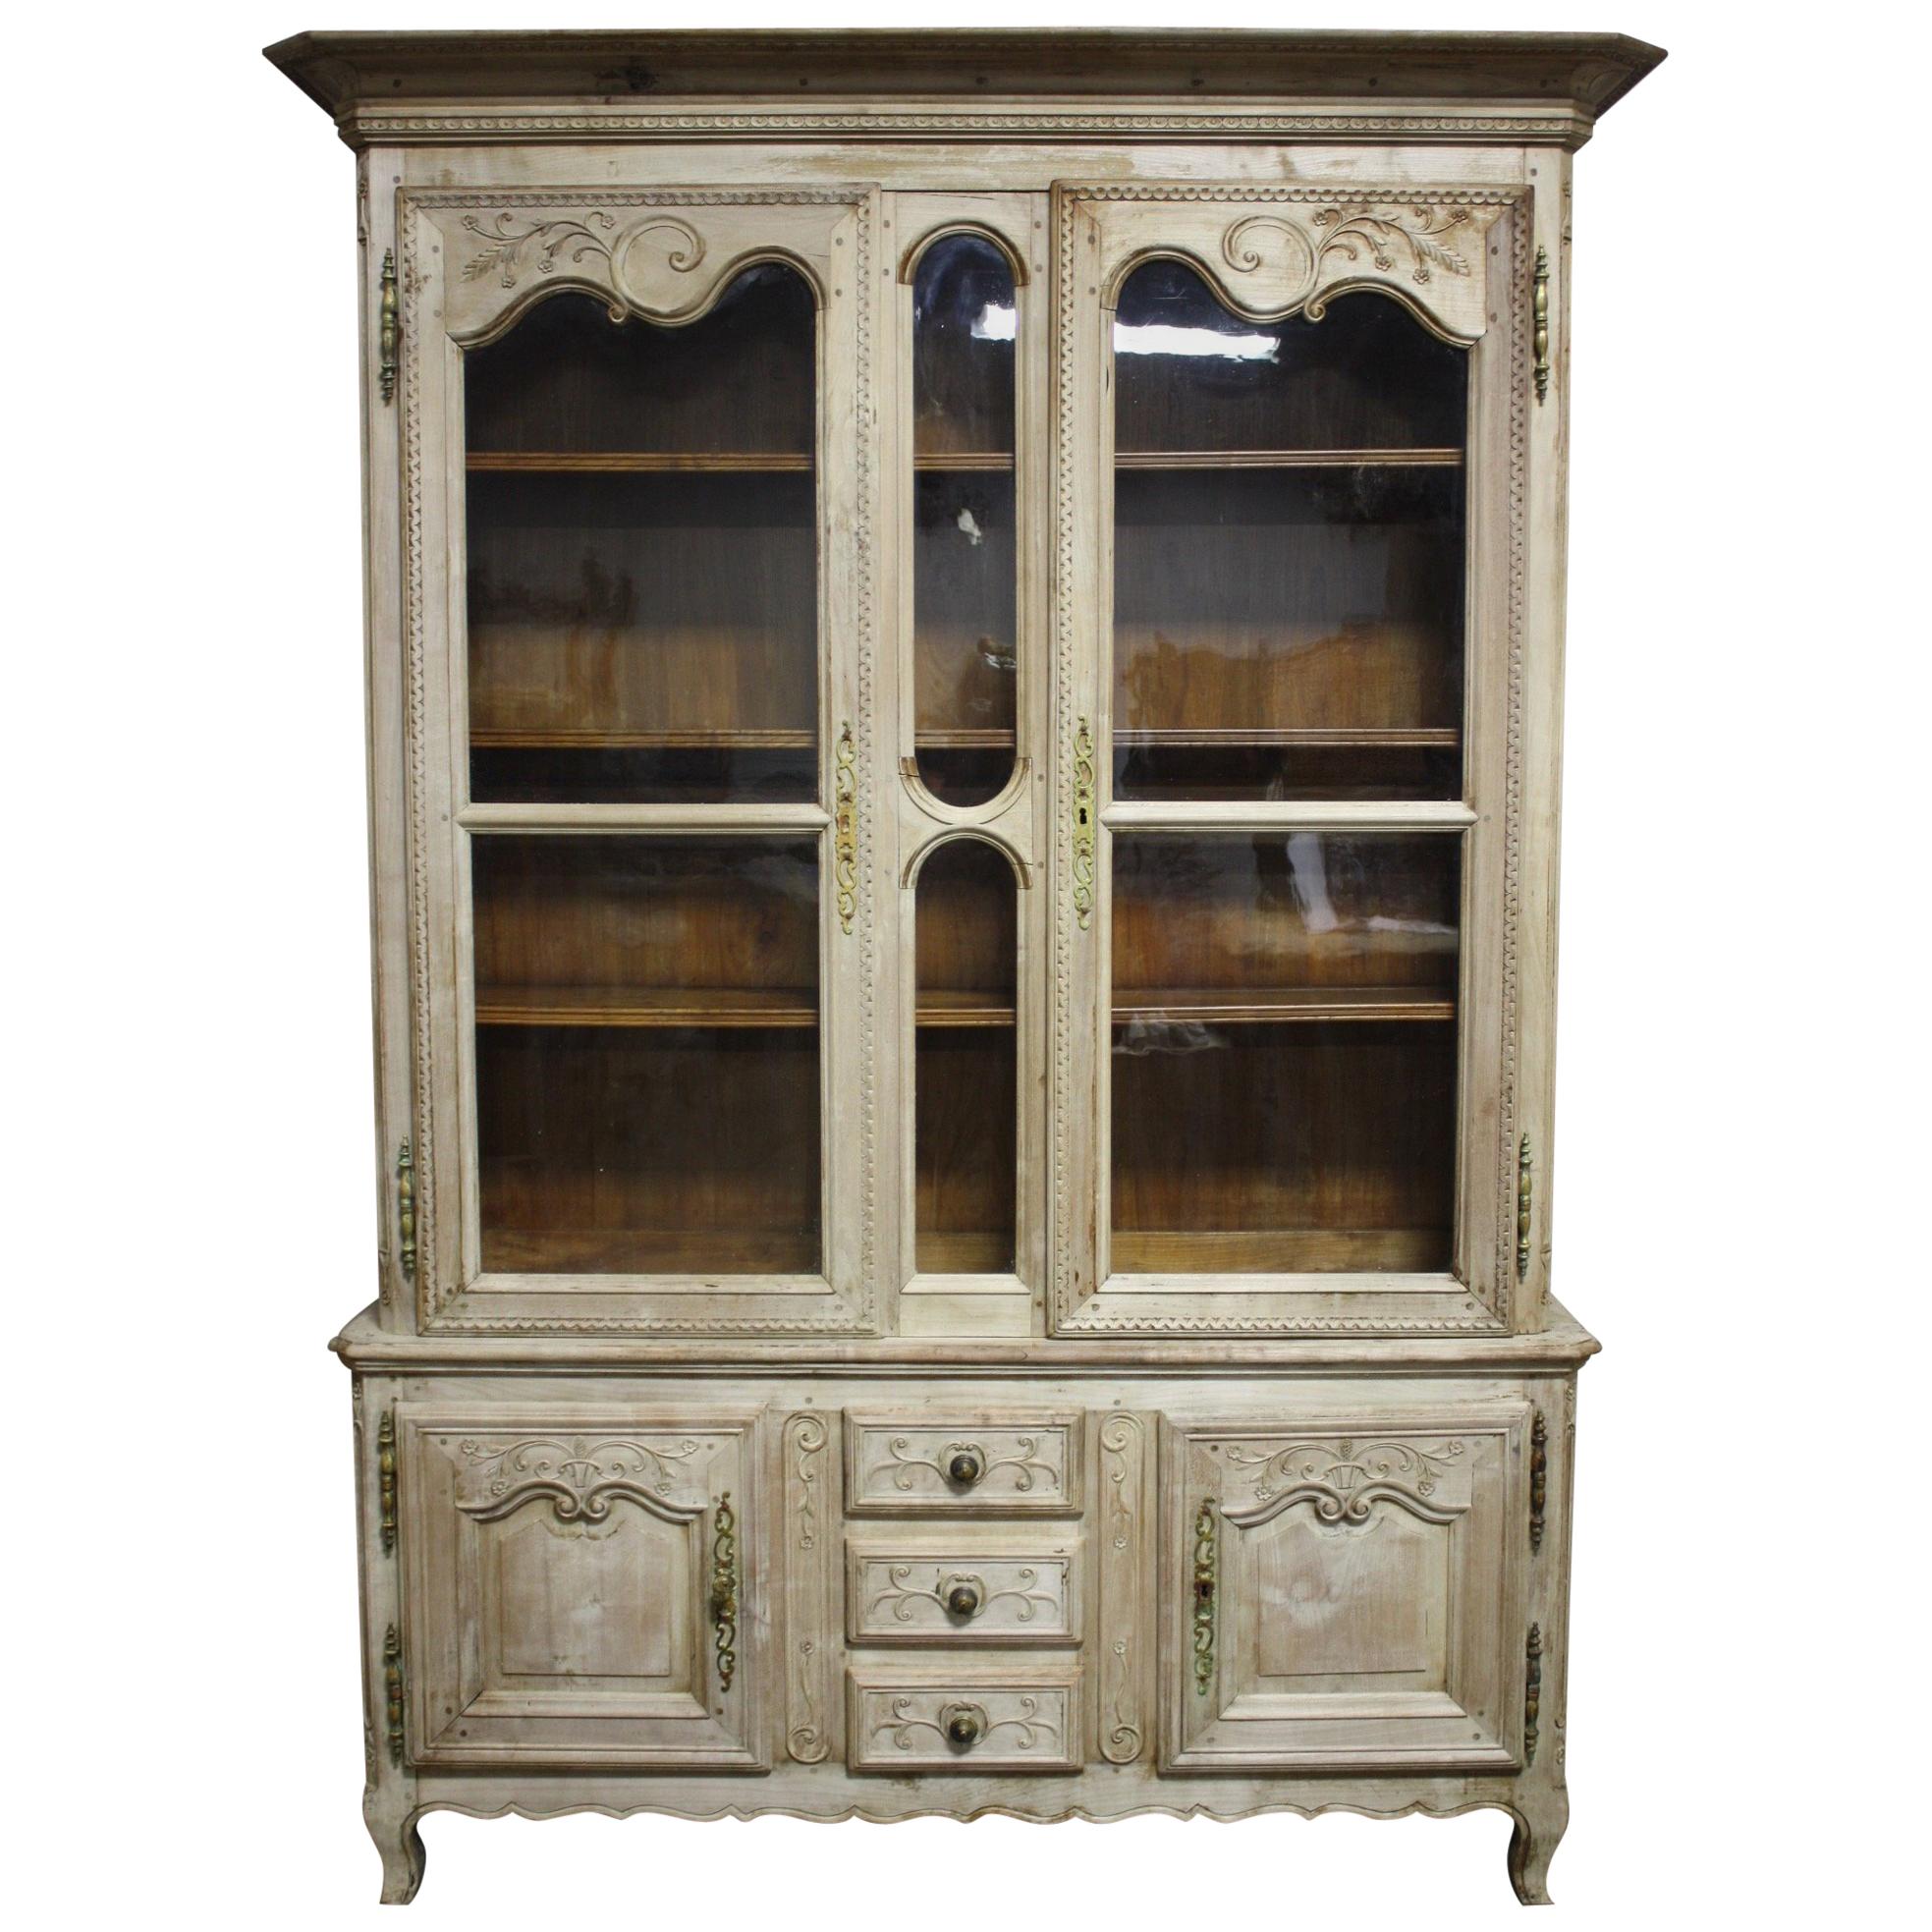 Charming 19th Century French Cabinet "deux-corps"